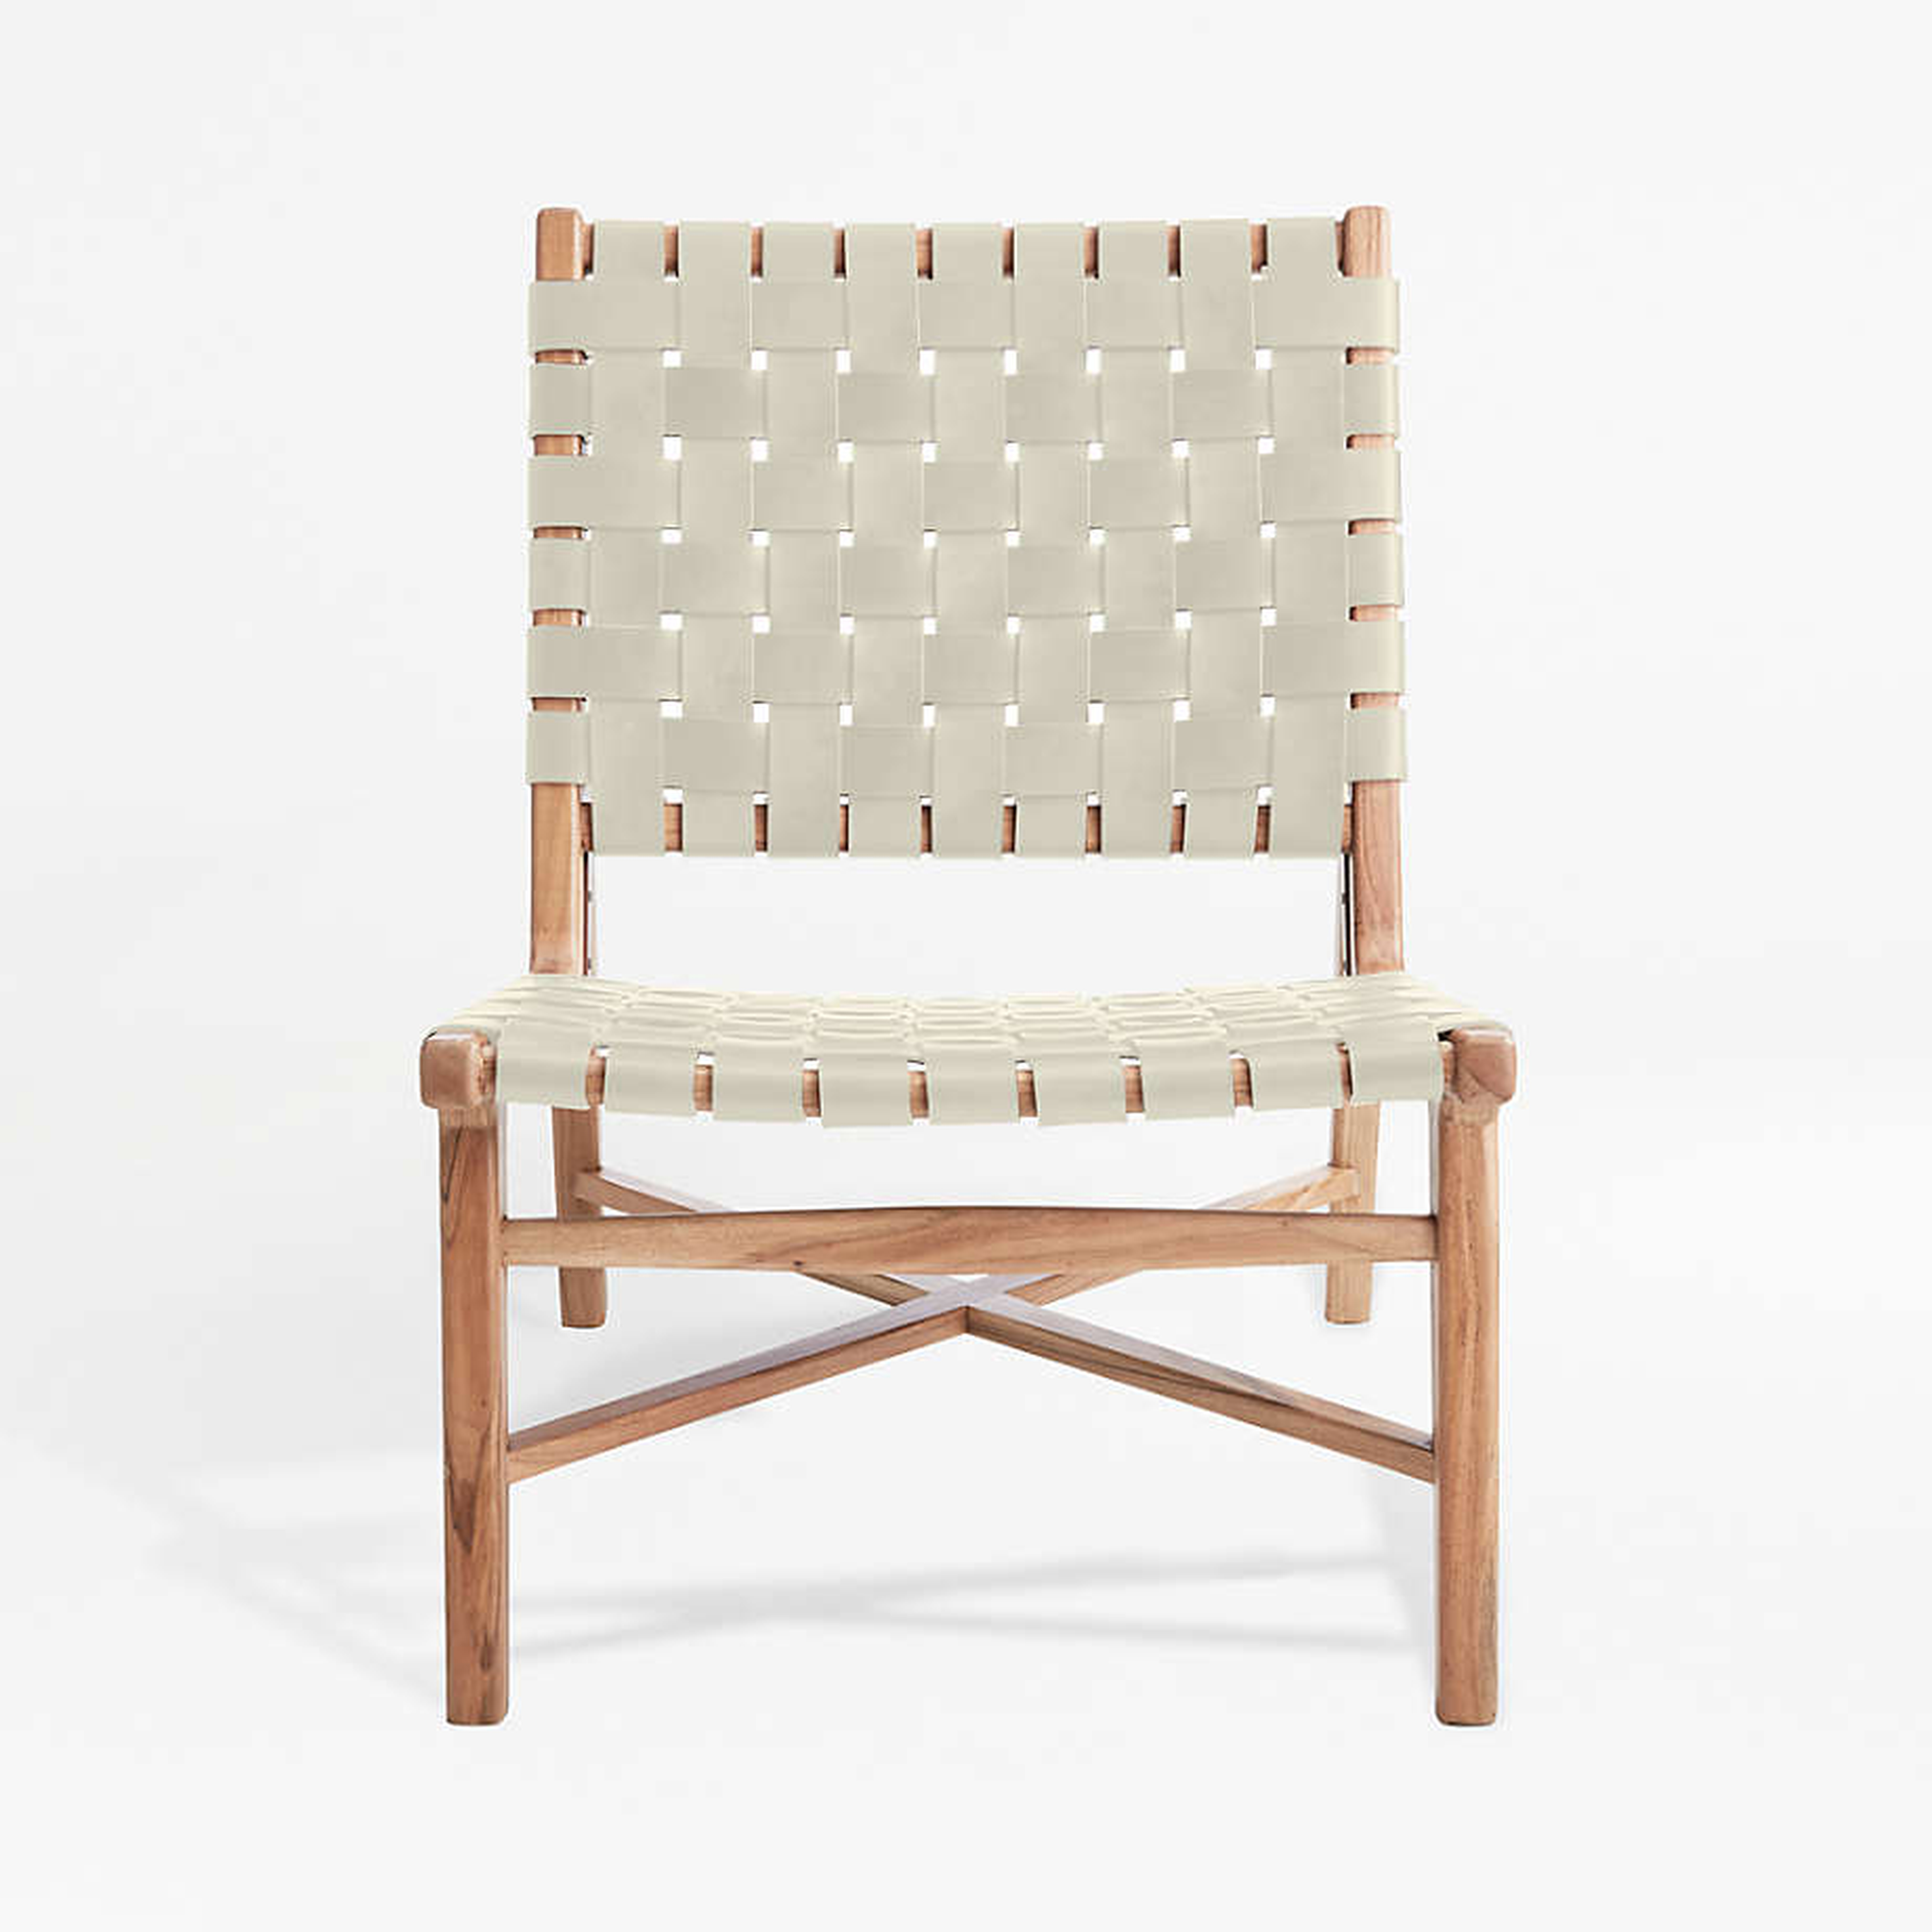 Taj White Woven Leather Strap Accent Chair - Crate and Barrel